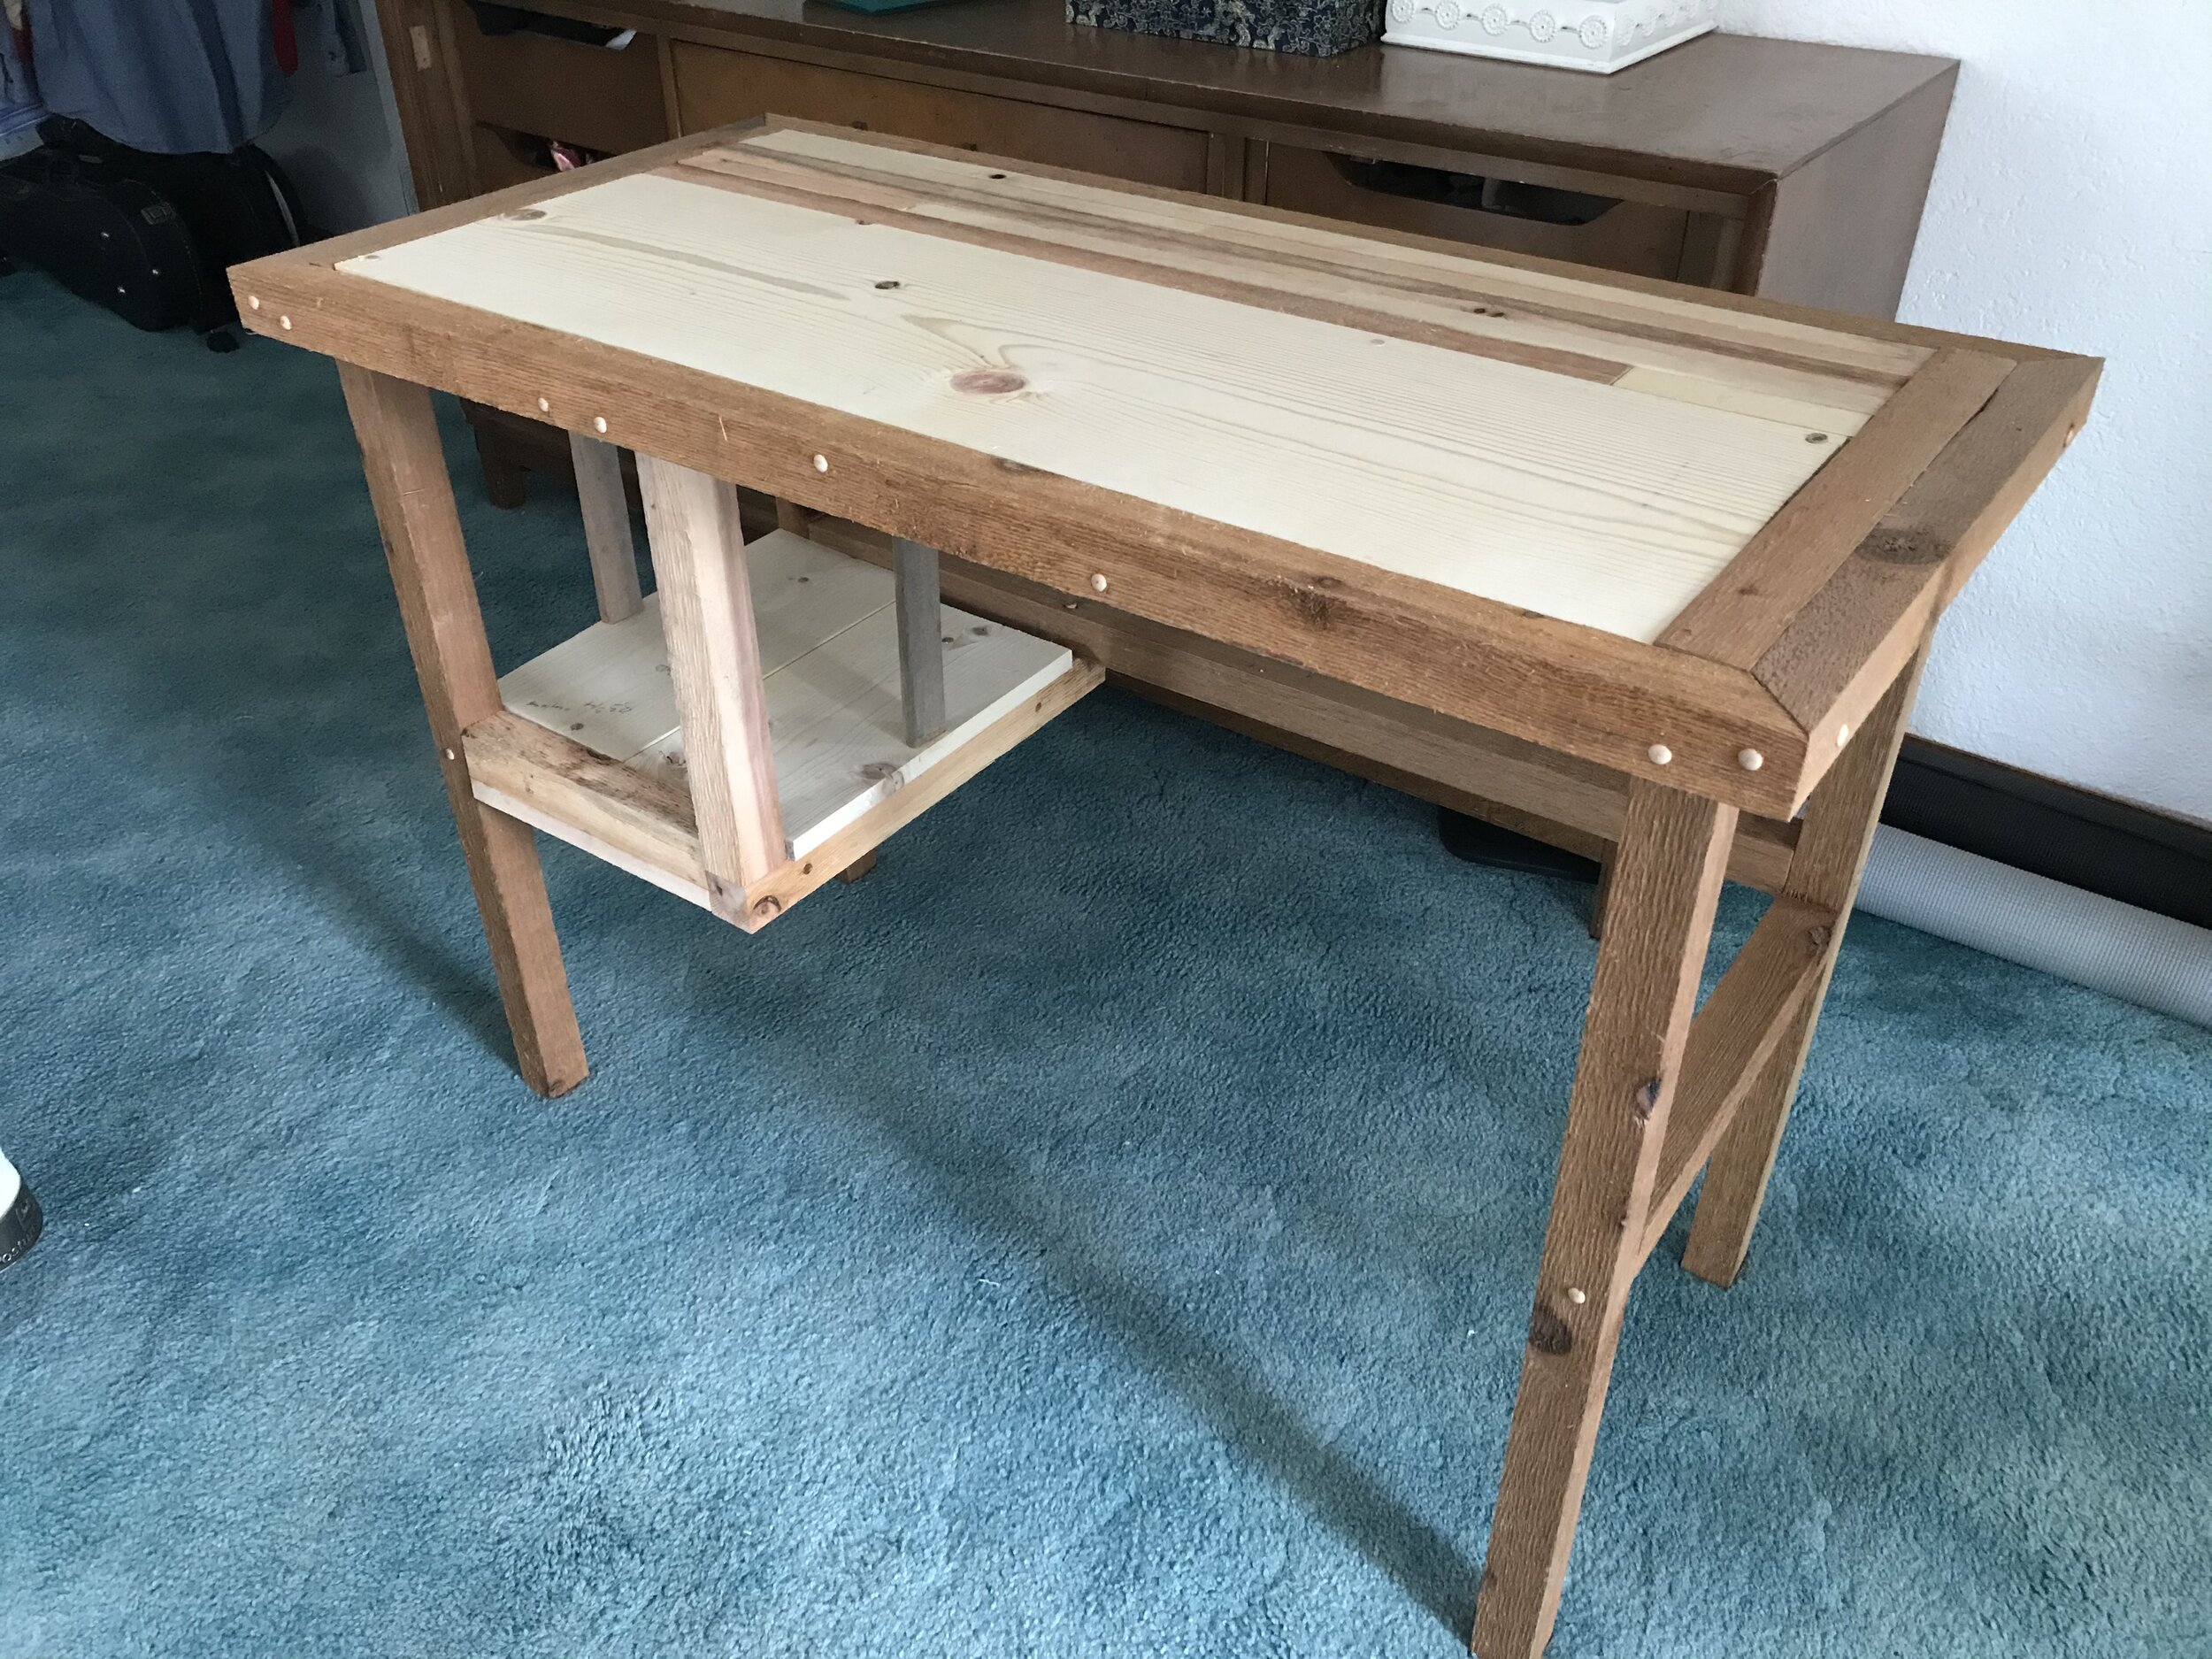 Quarantine Desk made out of Reclaimed and Scrap Lumber 